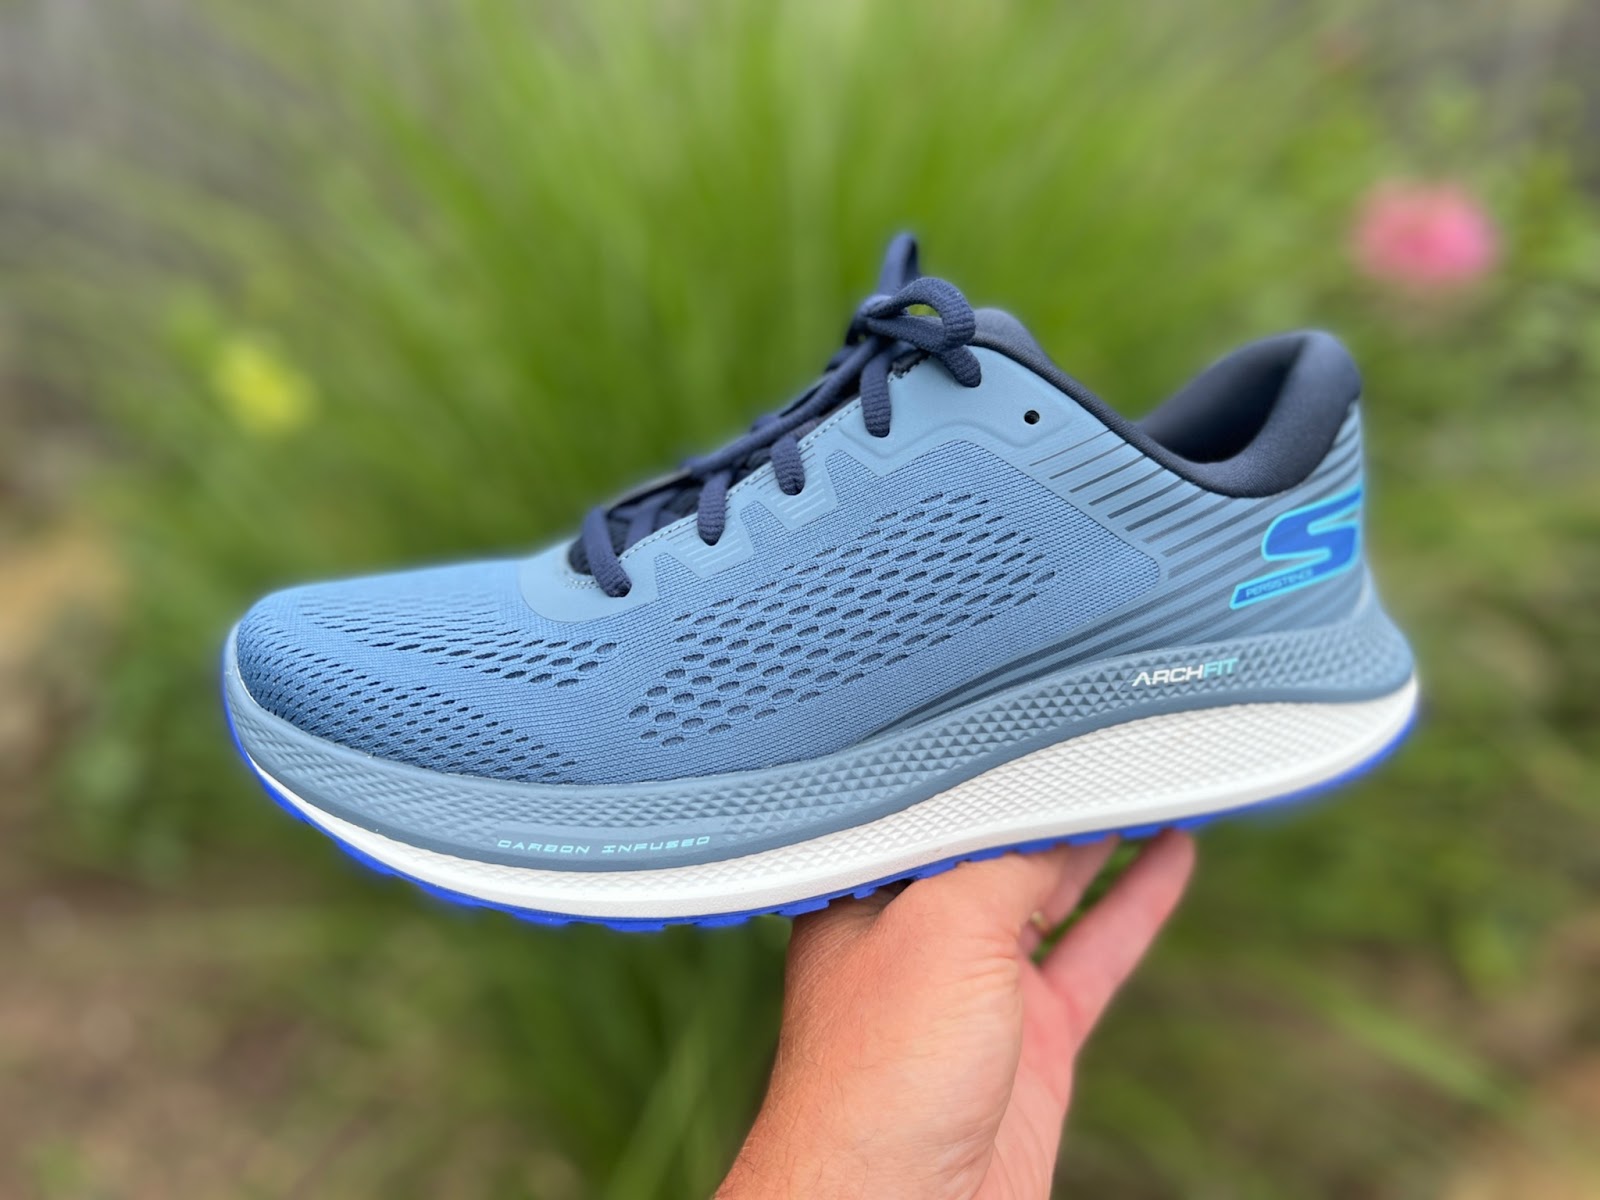 Road Trail Run: Skechers GO Run Persistence Multi Tester Review & New Craft  Beer/Shoe Pairing! 5 Comparisons